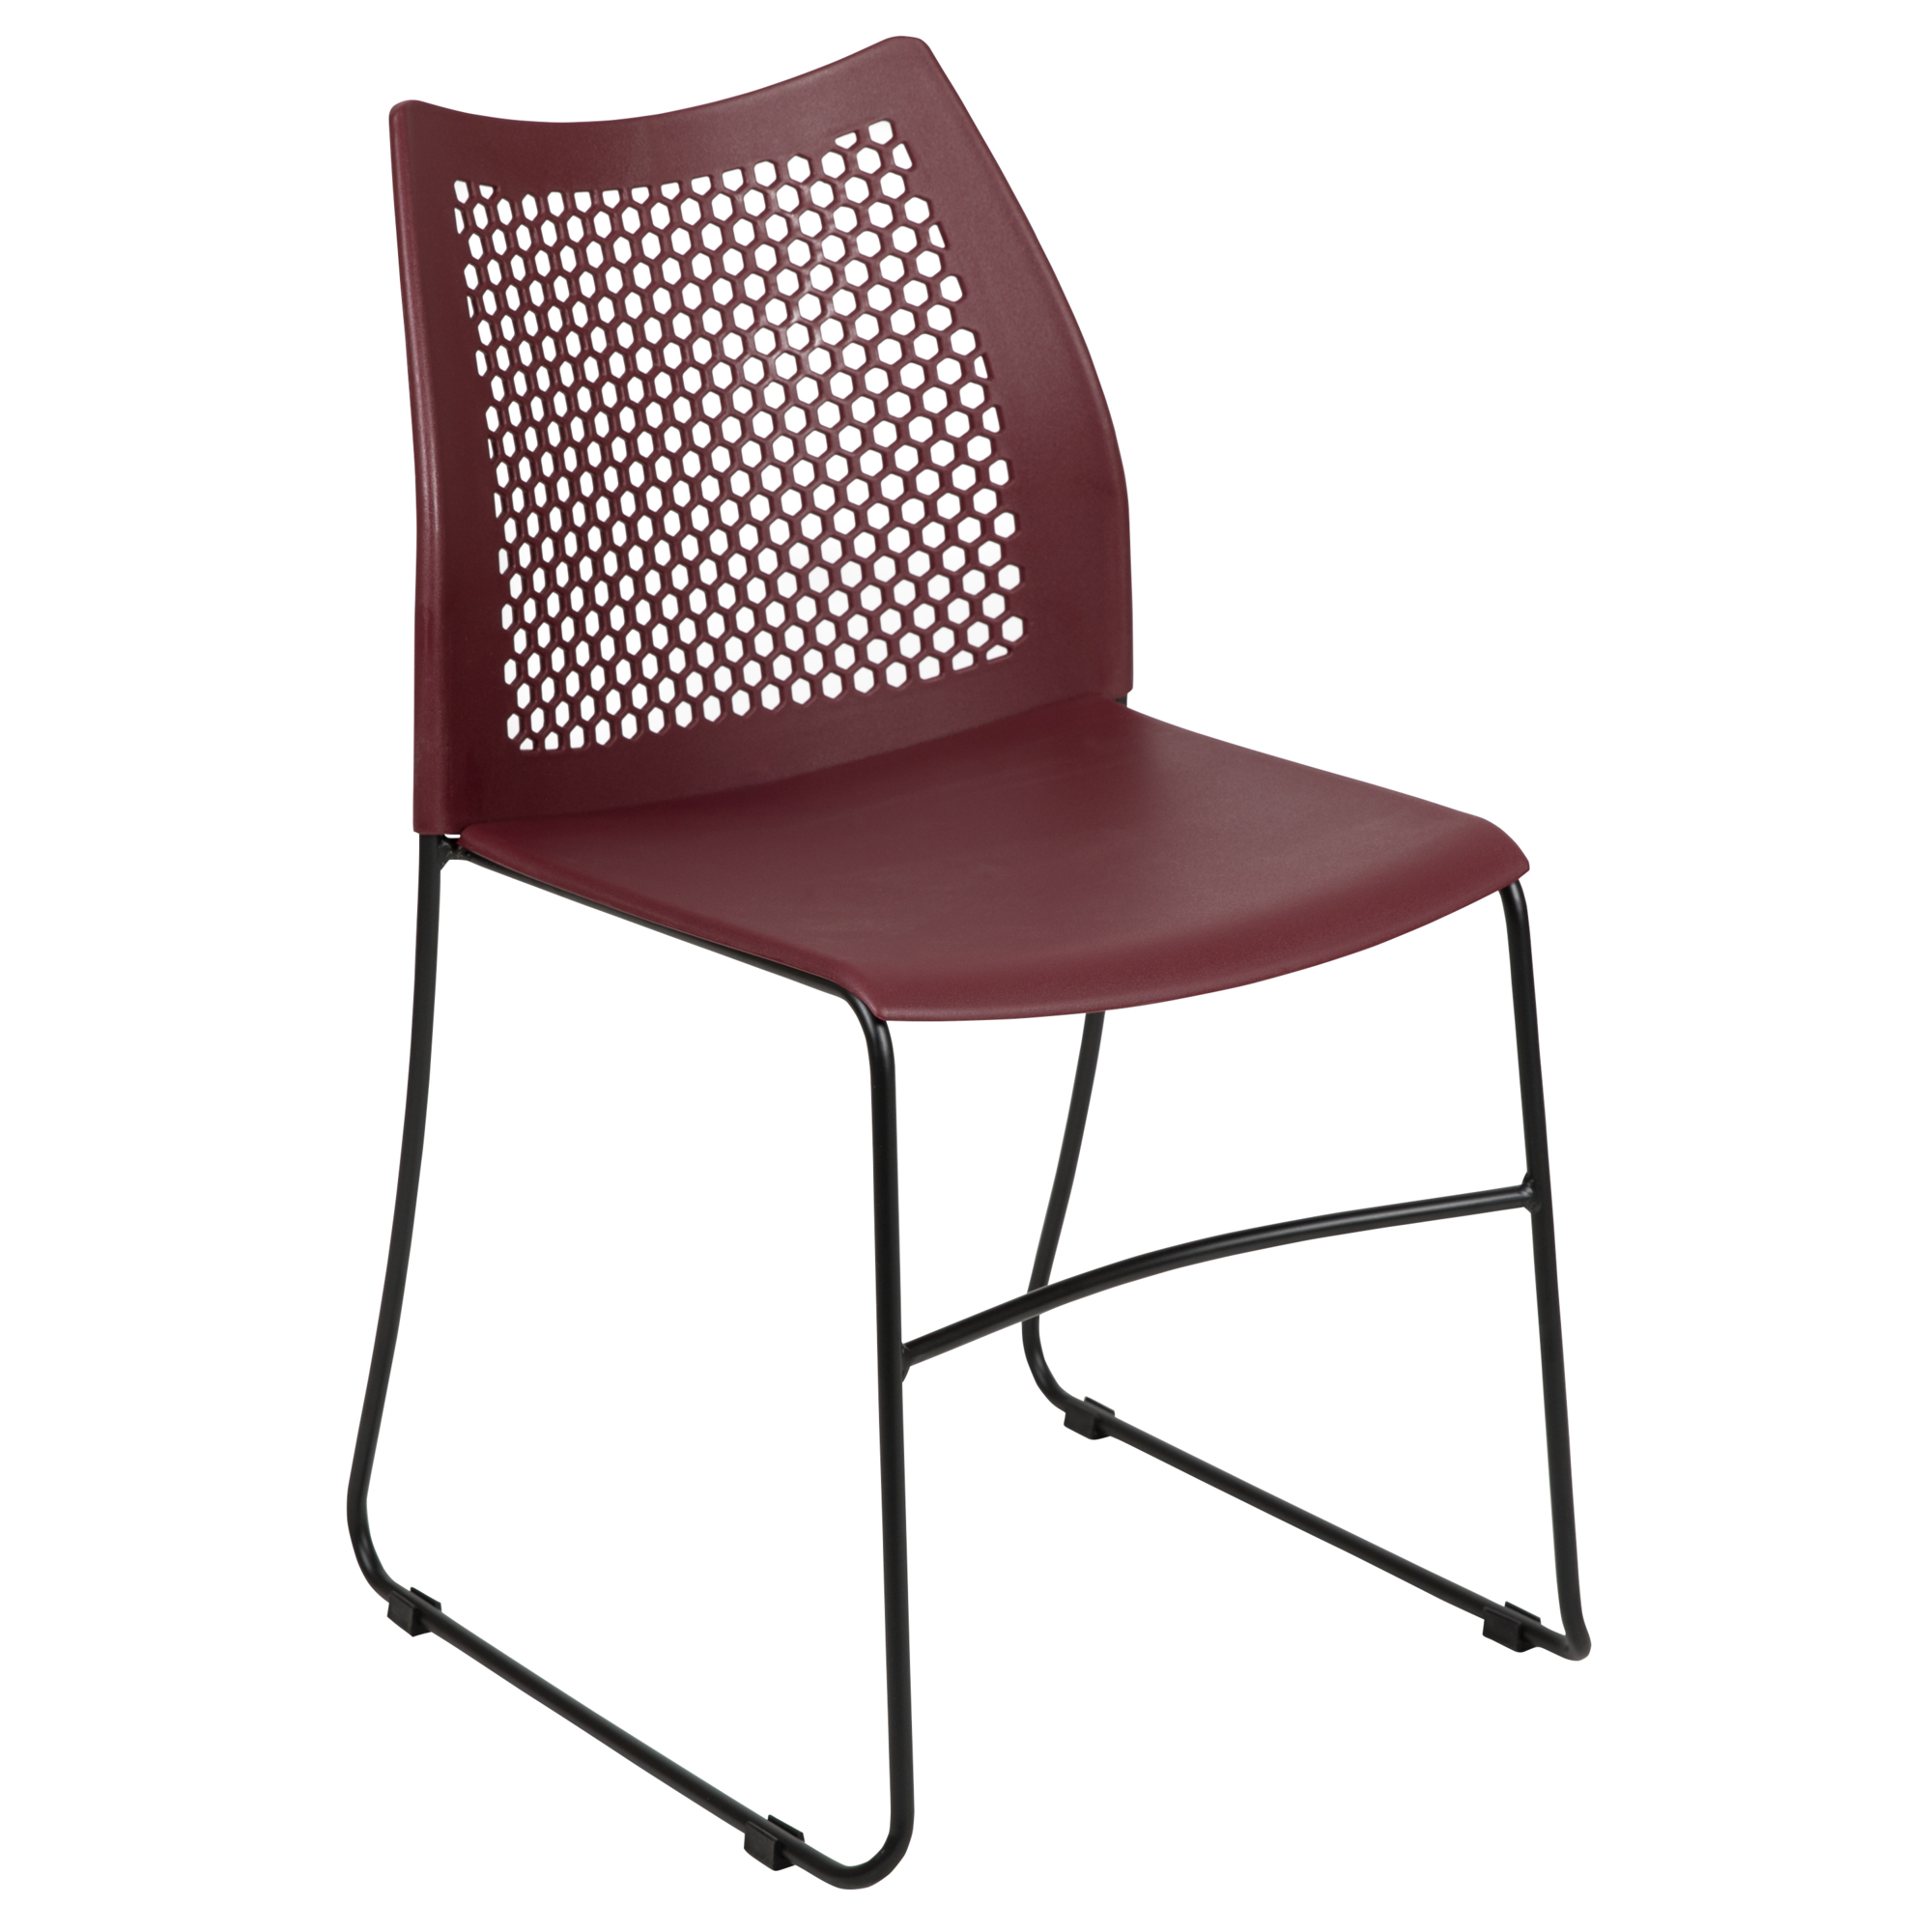 Flash Furniture, Burgundy Sled Base Stack Chair with Air-Vent Back, Primary Color Burgundy, Included (qty.) 1, Model RUT498ABY